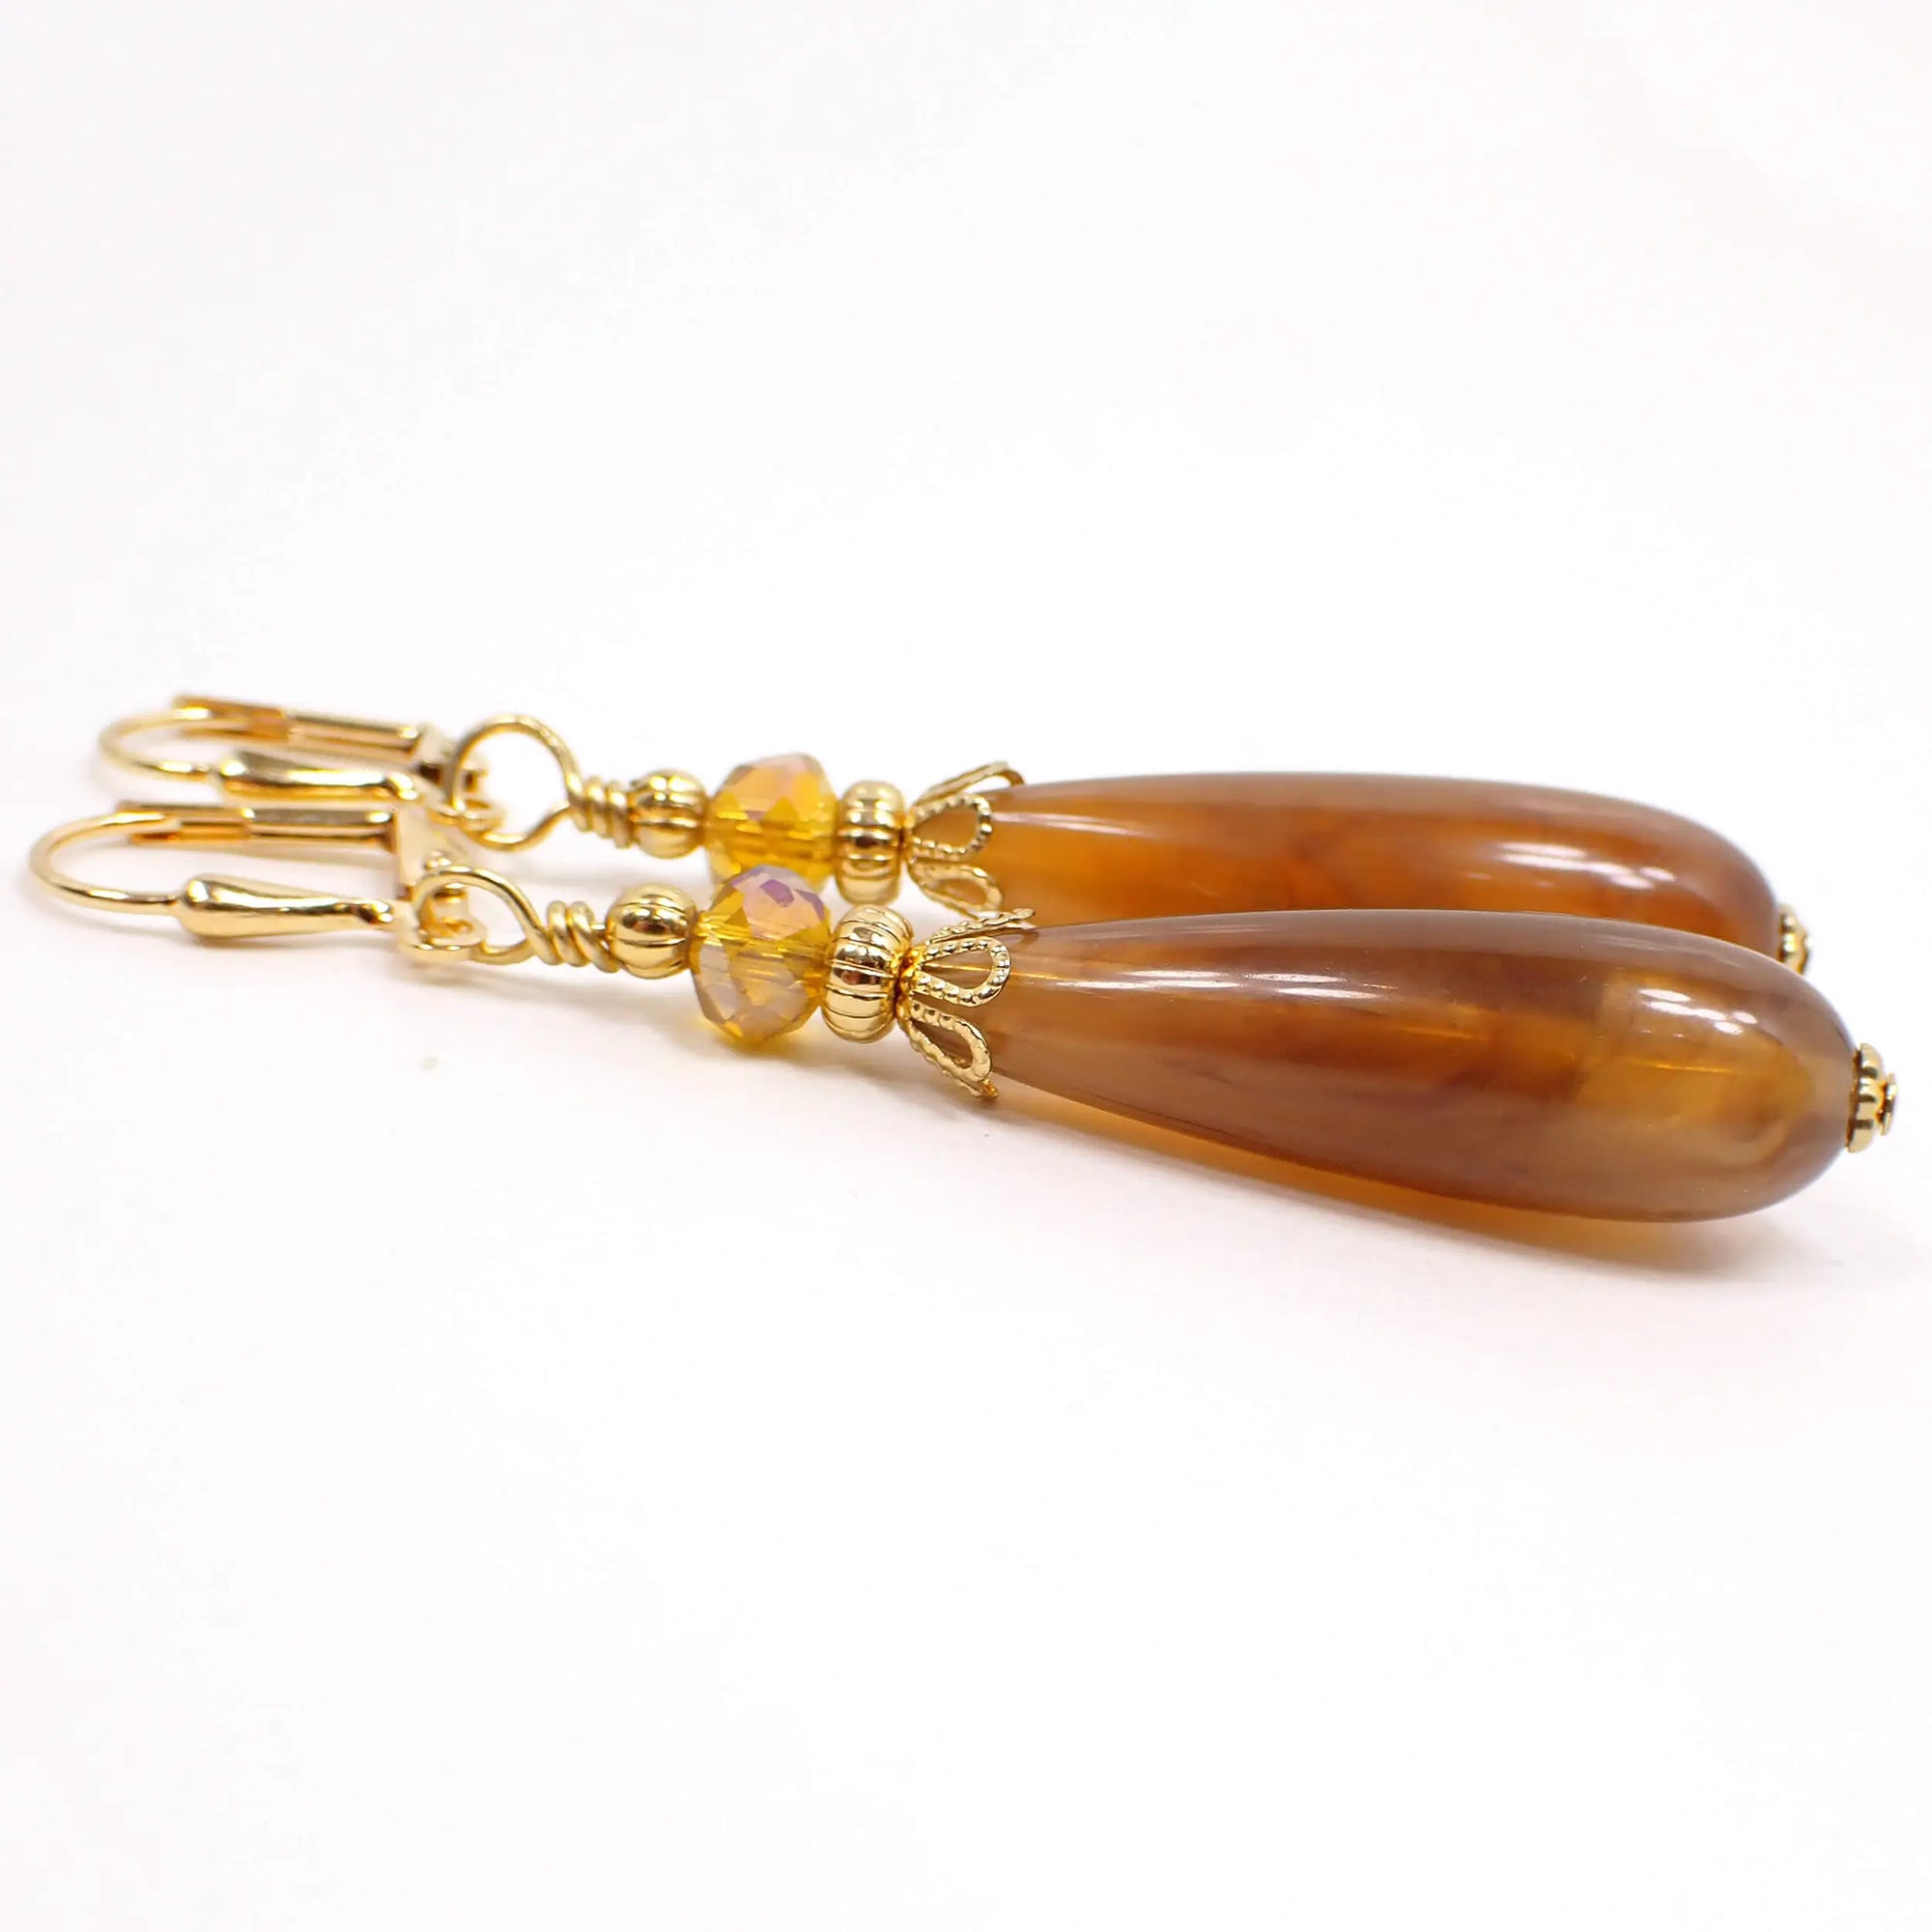 Side view of the handmade marbled lucite beaded earrings. The metal is gold plated in color. There is a faceted orange glass crystal bead at the top and a marbled vintage lucite teardrop bead at the bottom. The teardrop bead has swirls of caramel brown and orange colors.